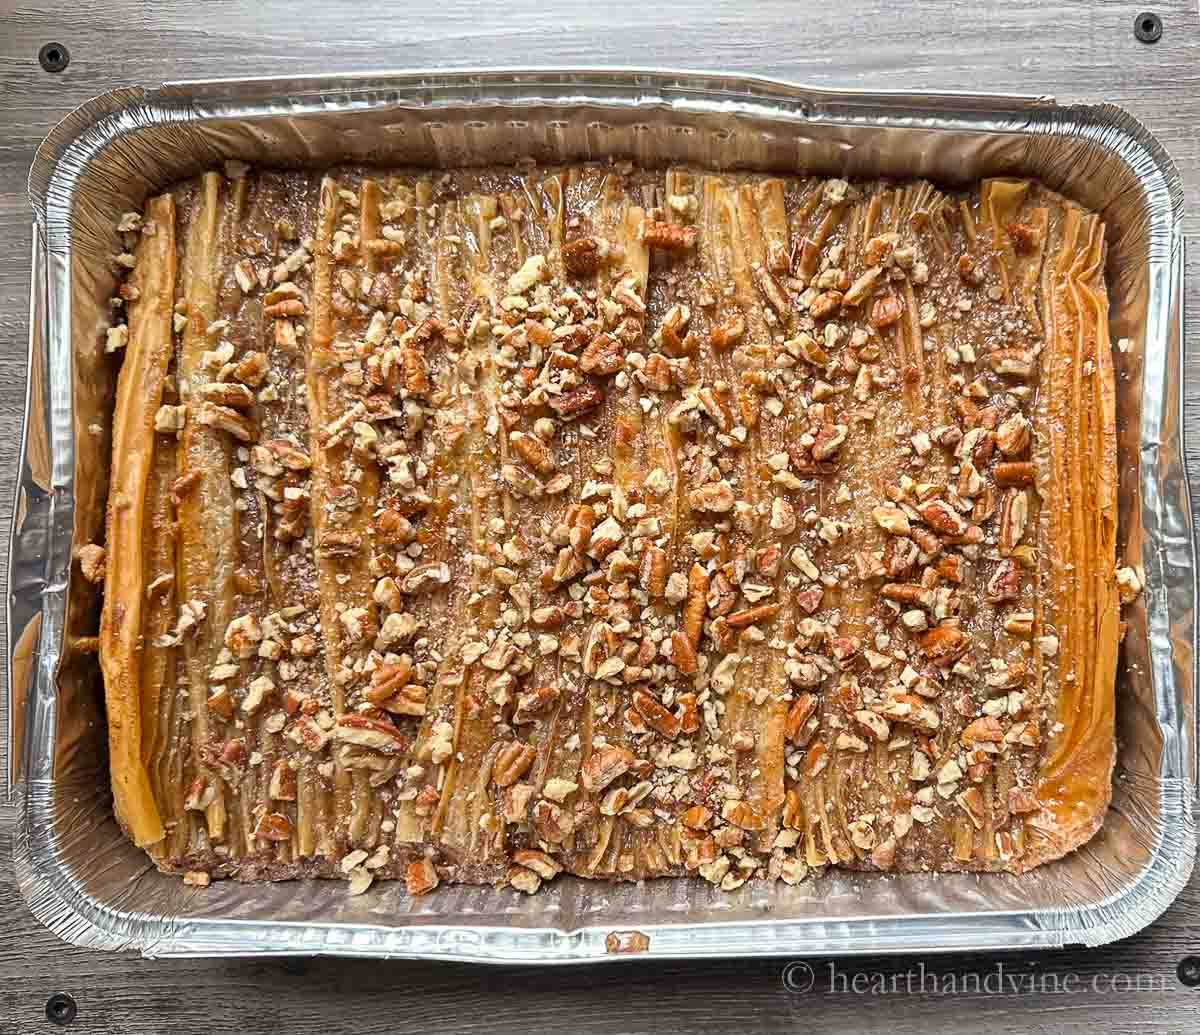 Crinkle cake topped with pecans.